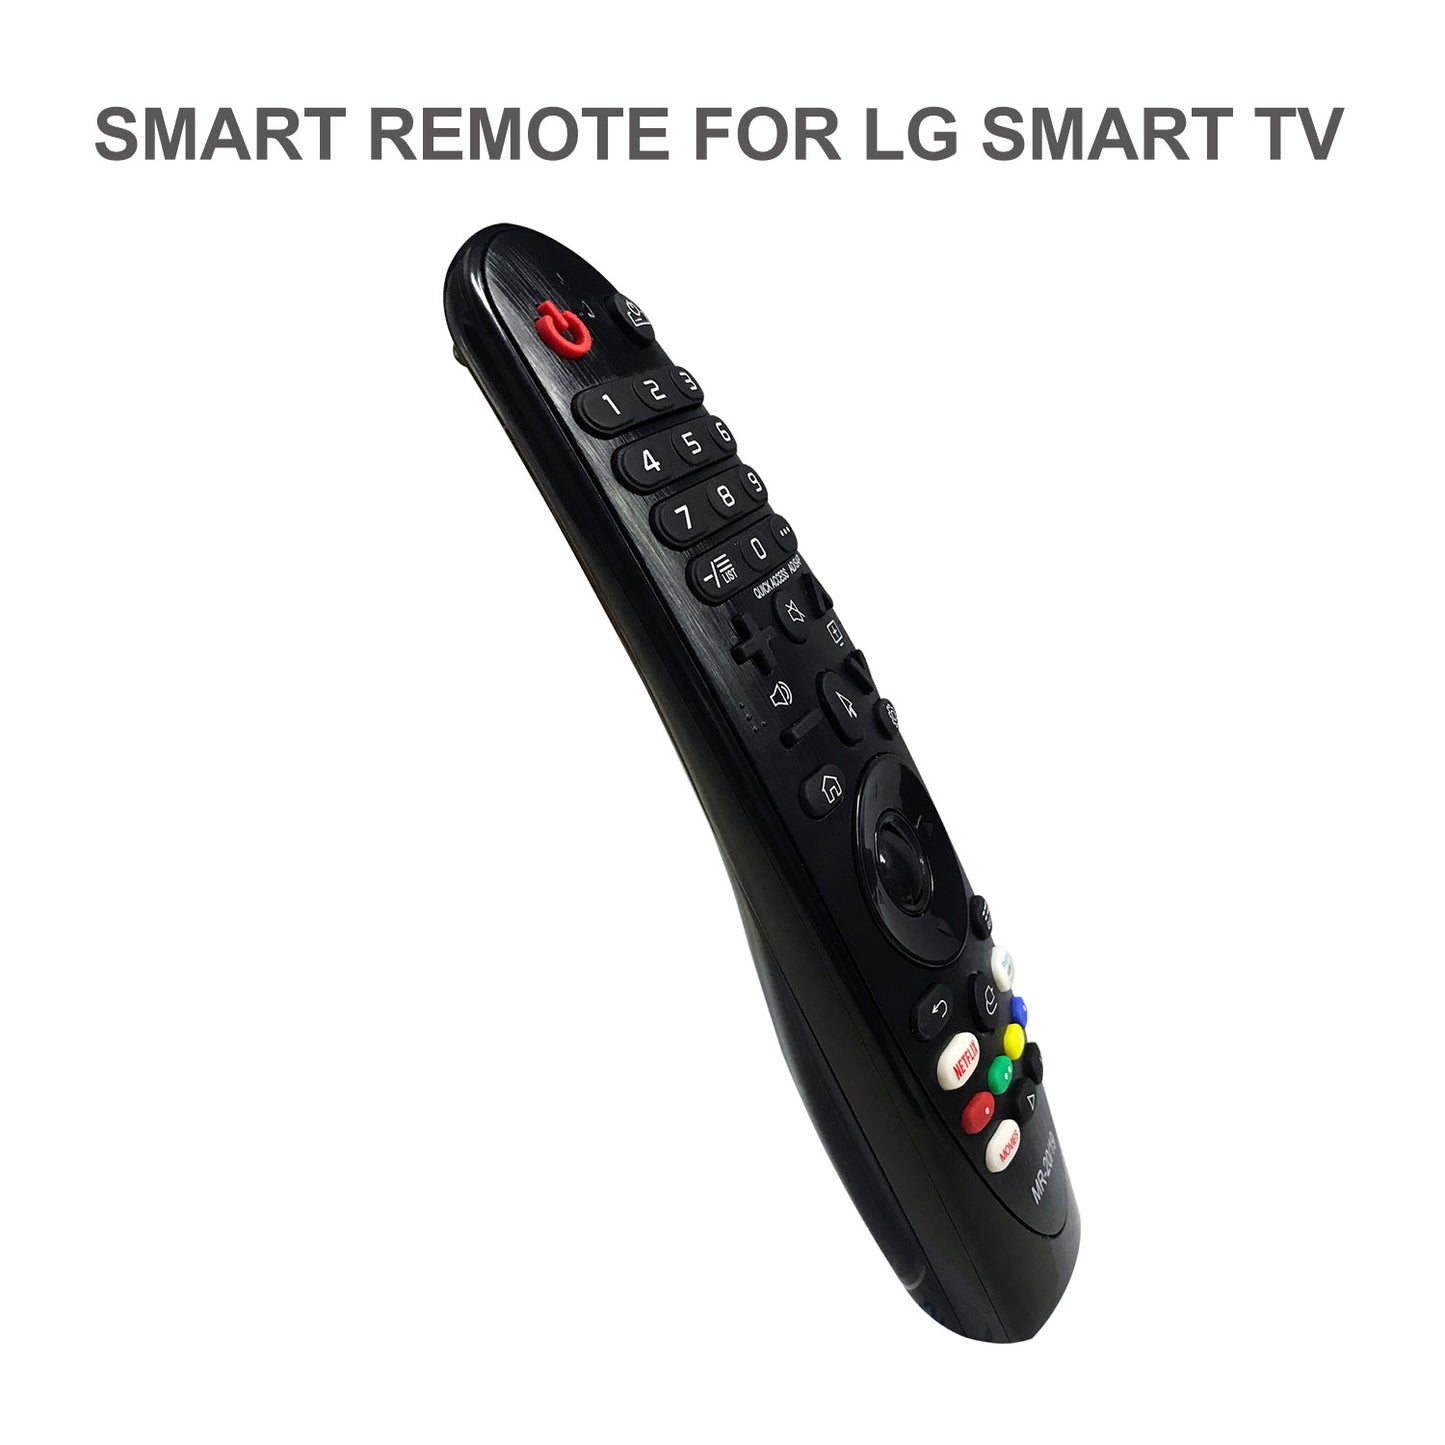 MR-20/19 Magic Cursor Remote Control For LG TV, AN-MR18/19/20/400/500/600/650, SK/UK/OLED Series (No Voice Command)